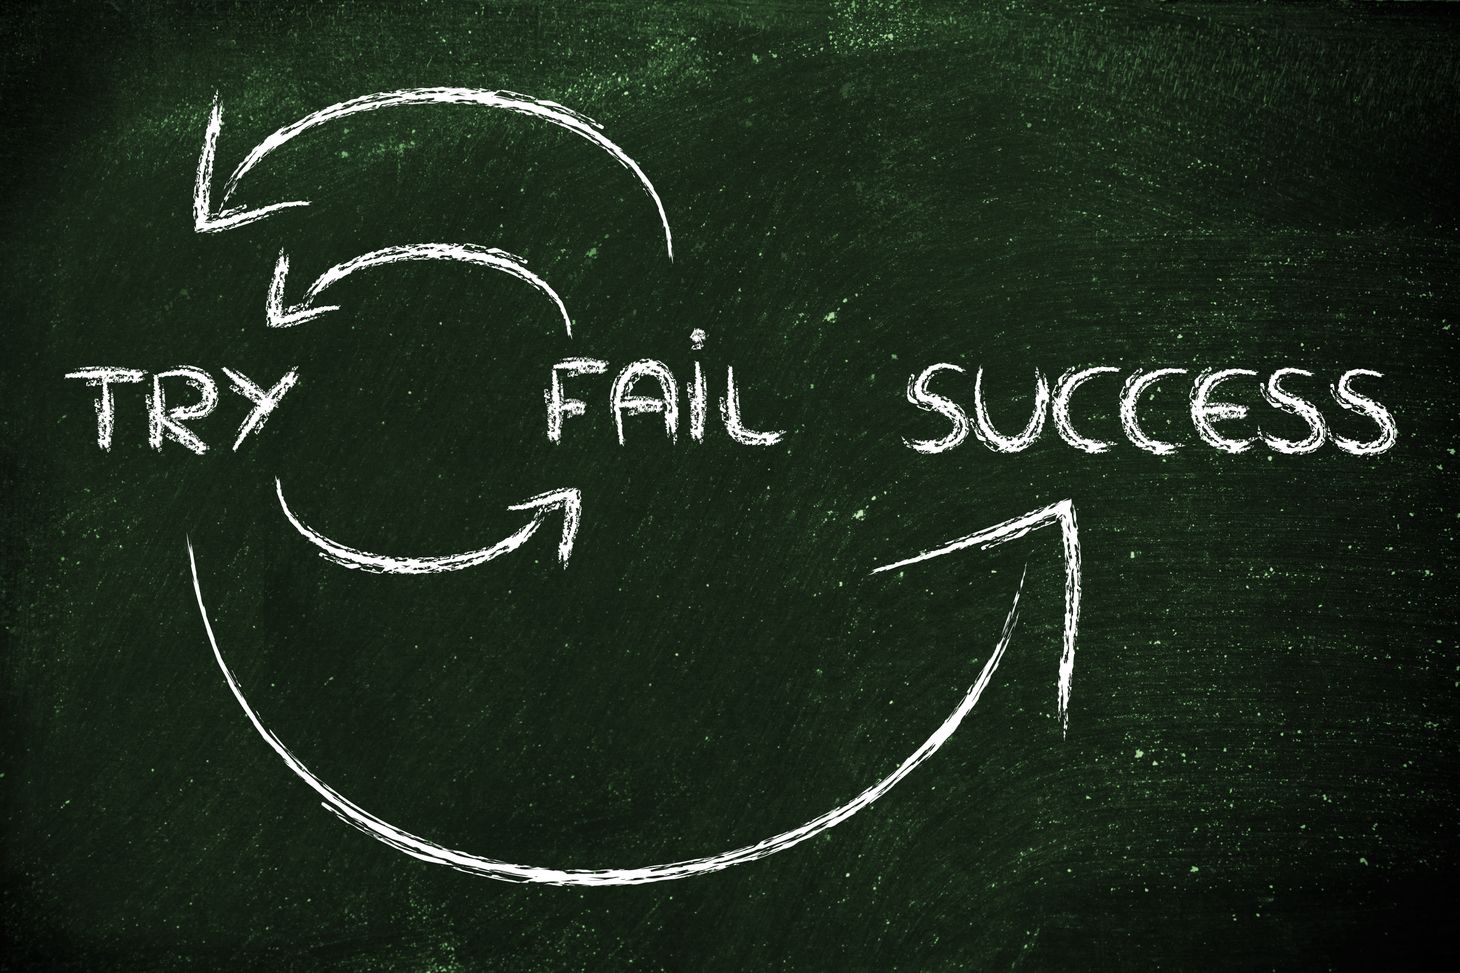 Leadership Failures and the Innovation Lessons Learned